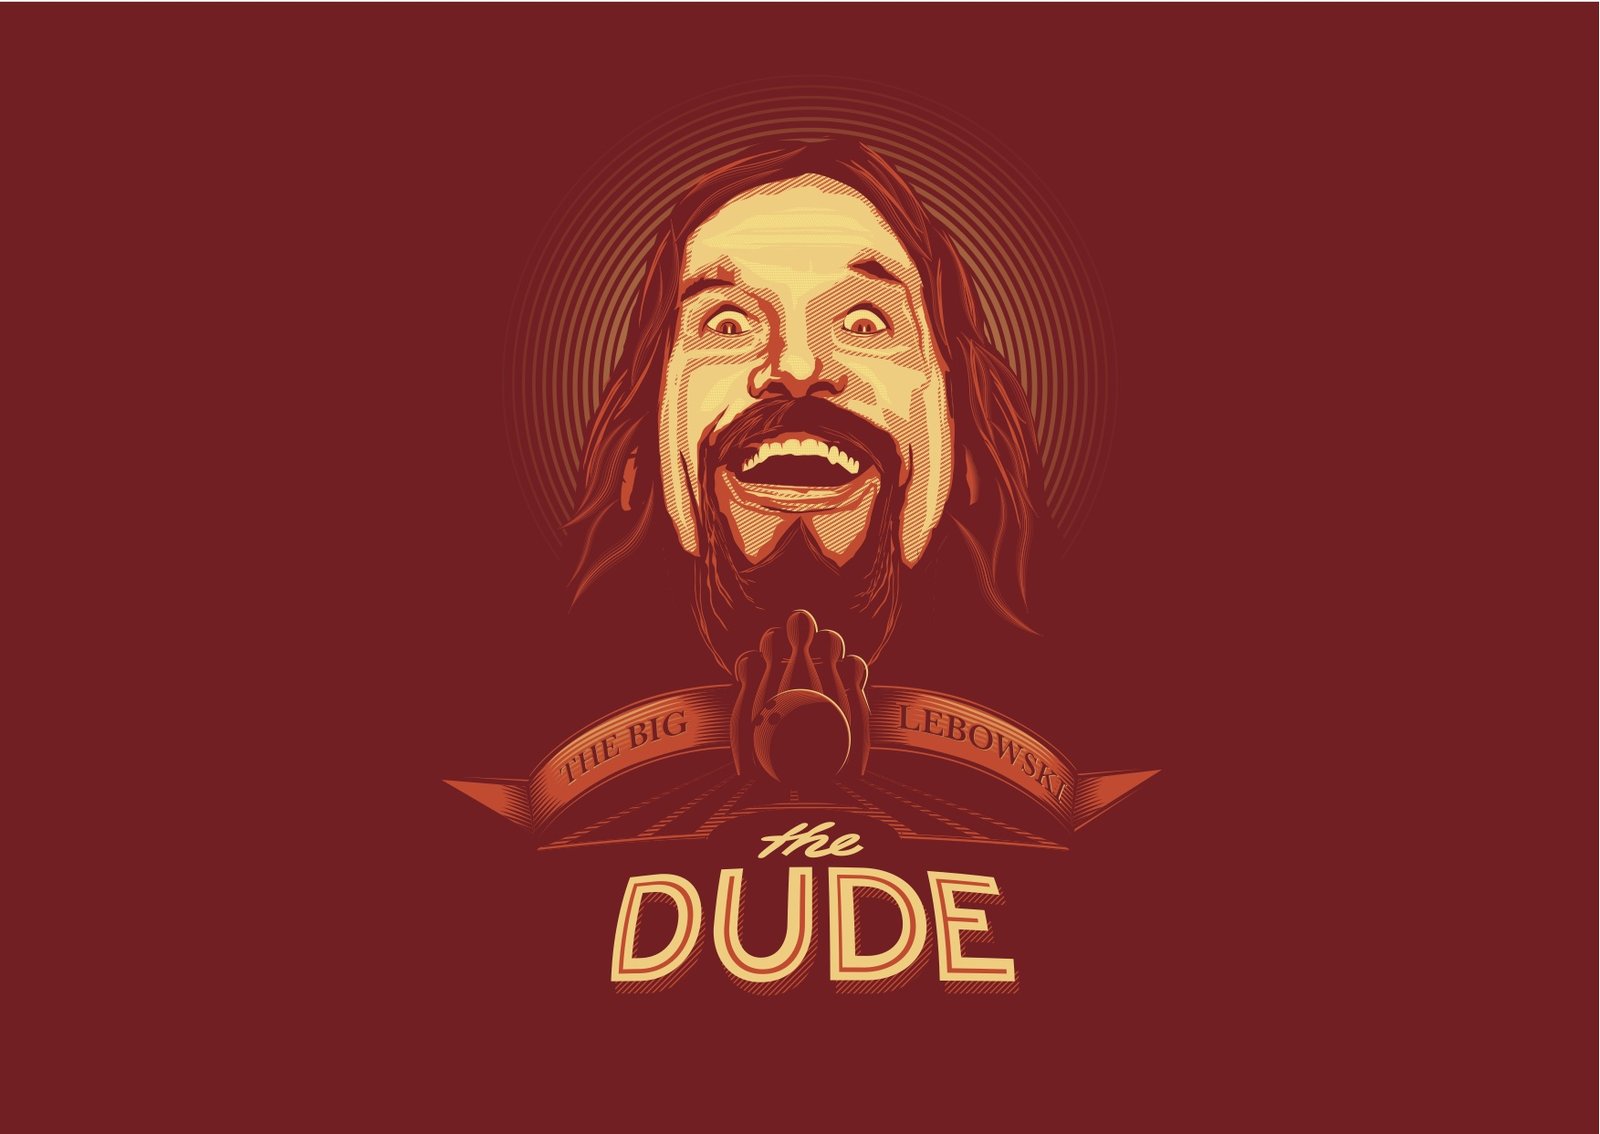 THE DUDE vector wallpaper by depot hdm on